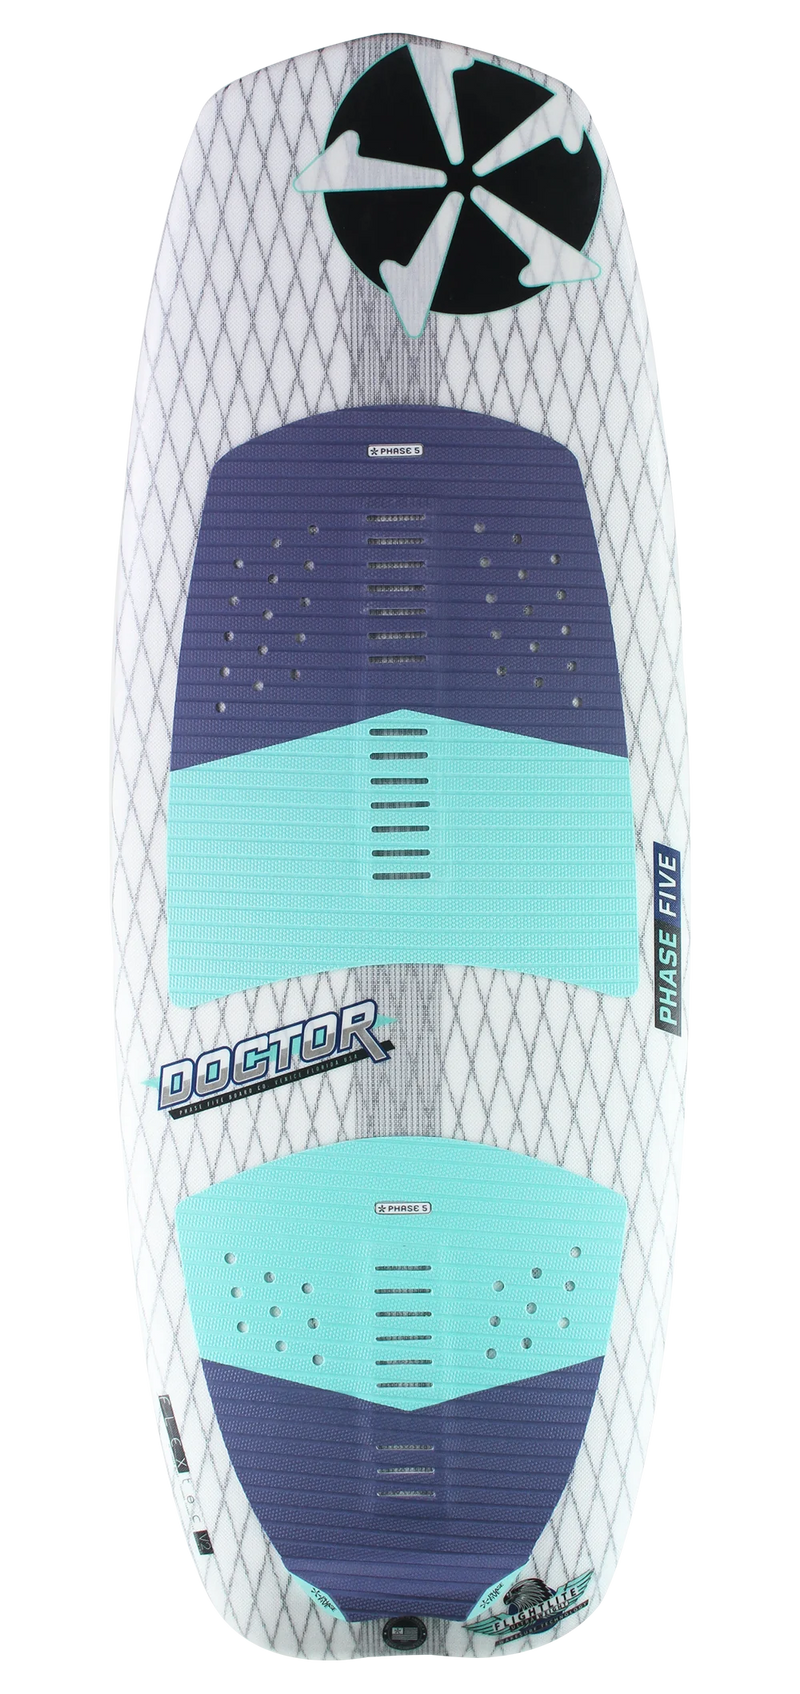 THE DOCTOR 59 IN SURF STYLE